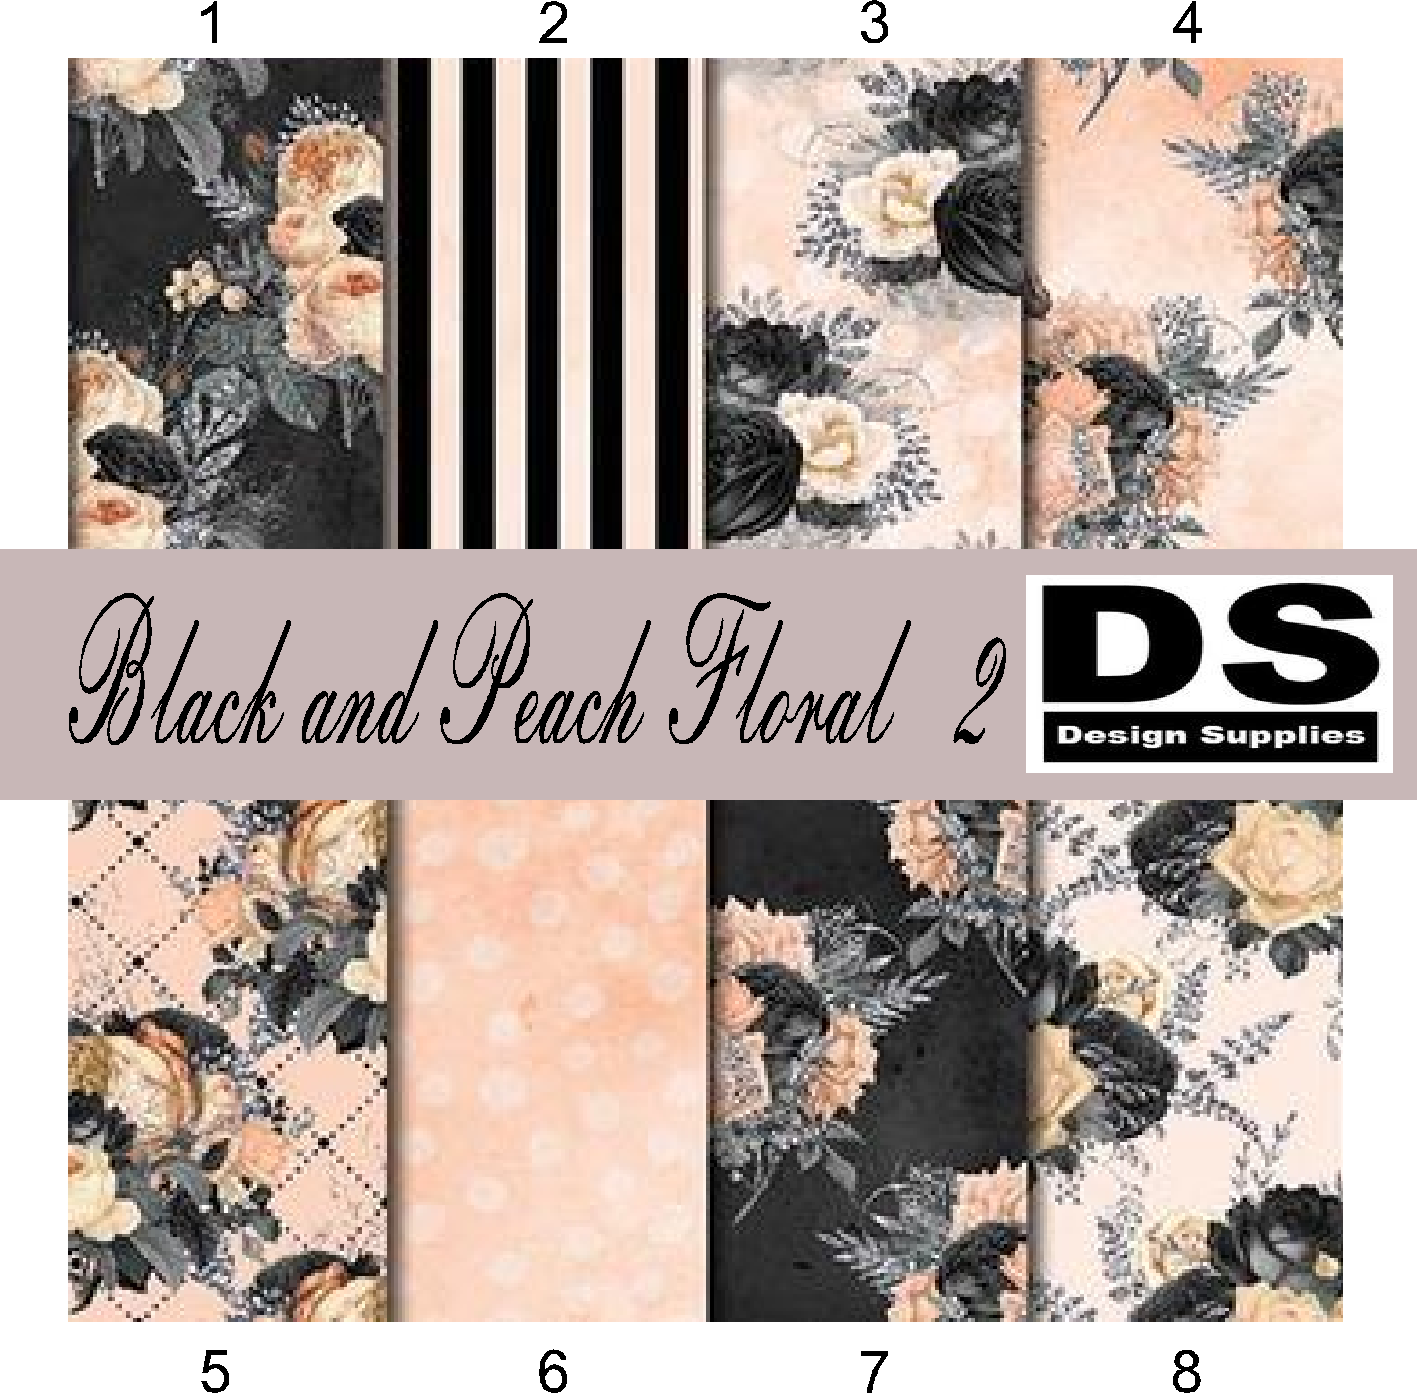 Black and Peach Floral 2